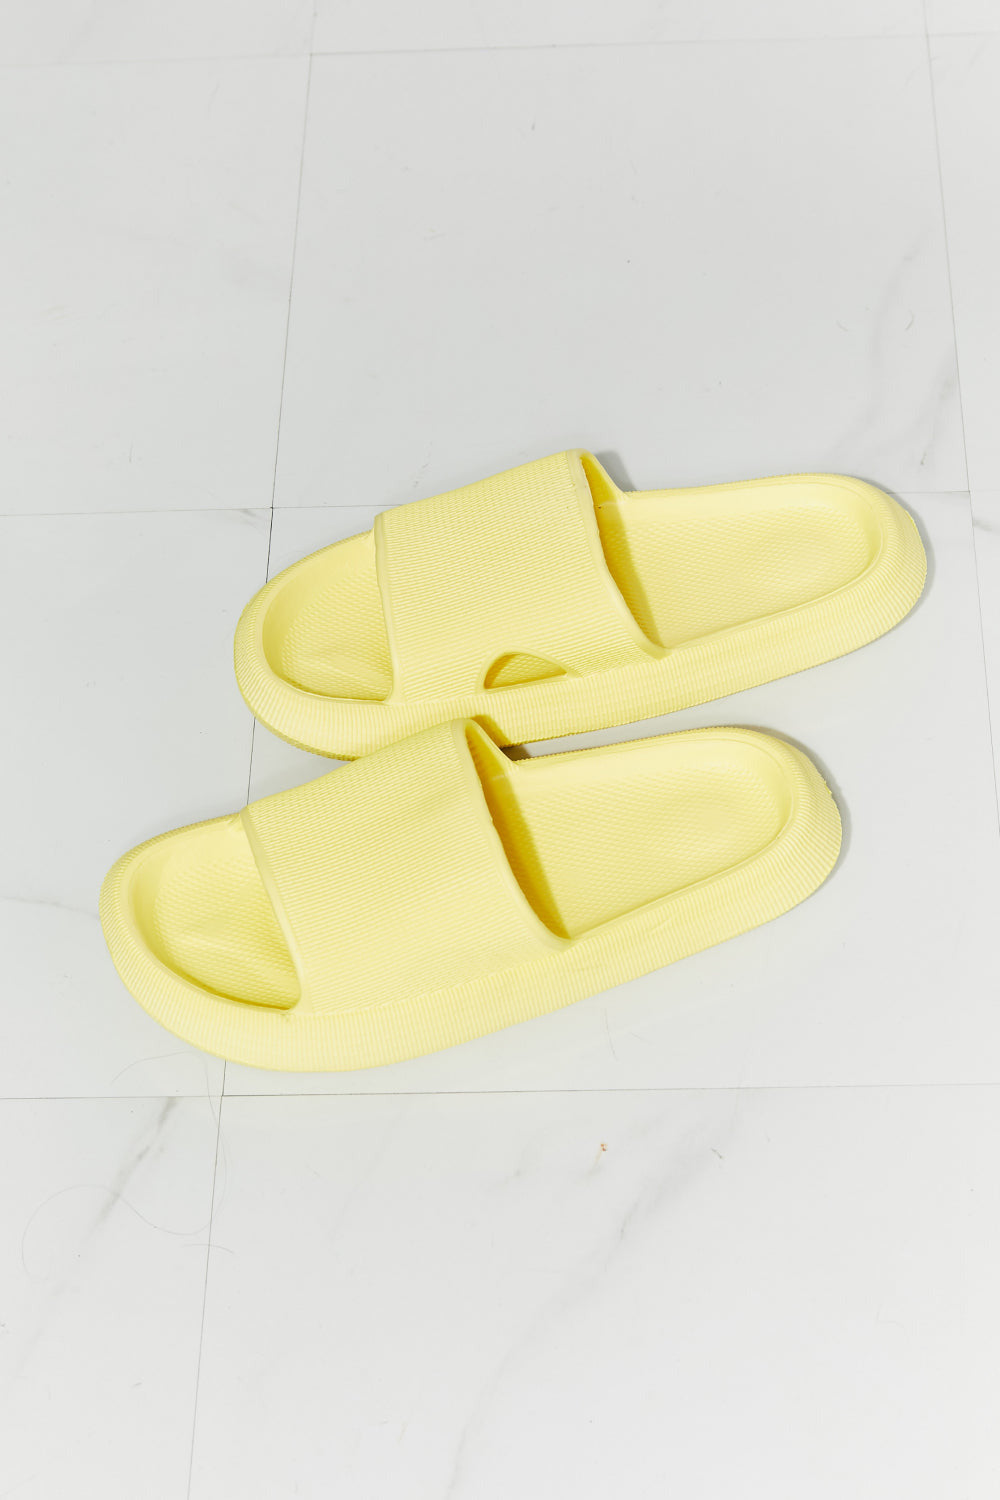 Arms Around Me Open Toe Slide Sandal in Yellow